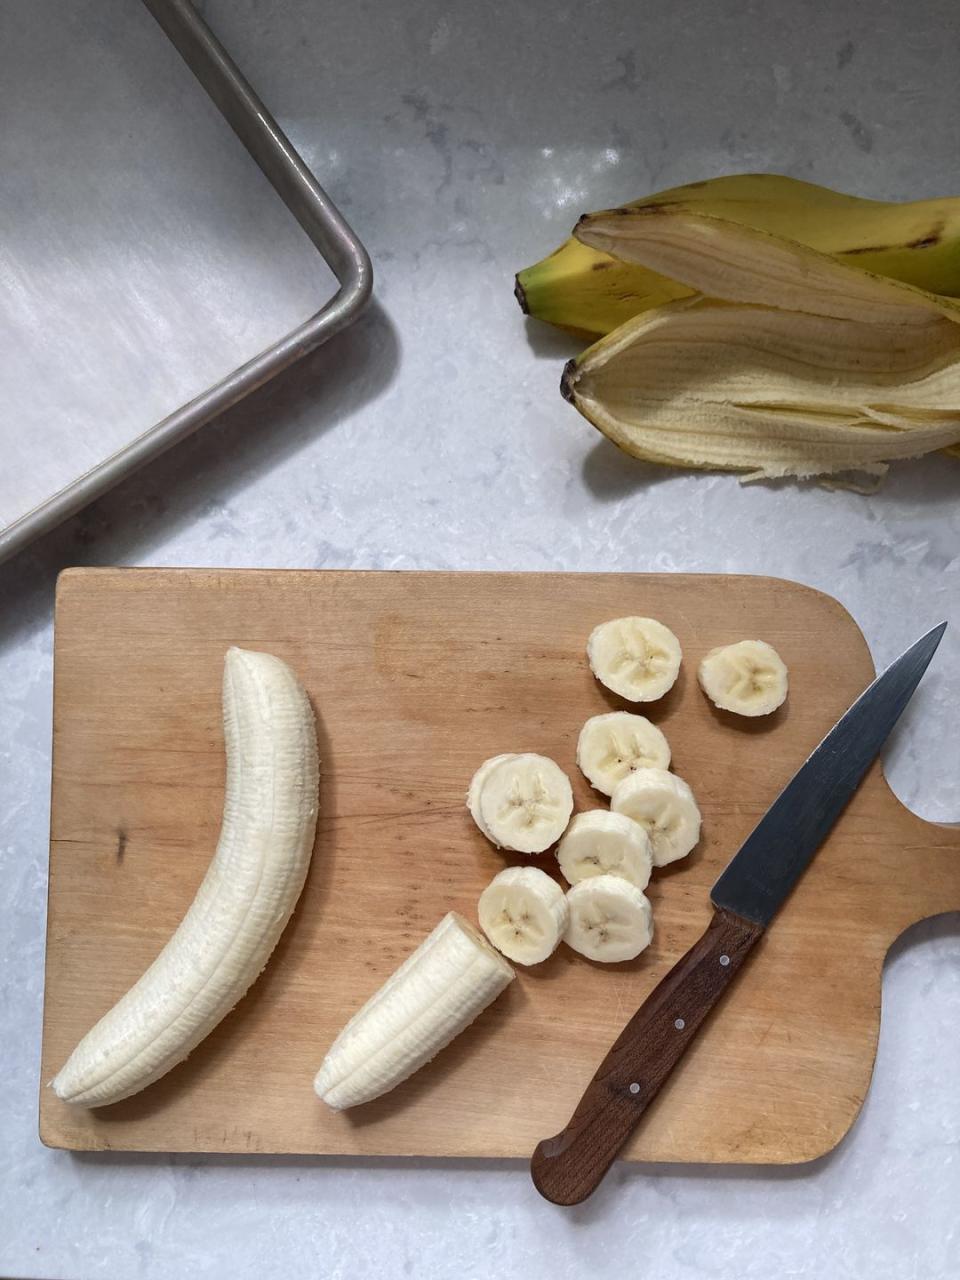 browning ripe bananas in a container